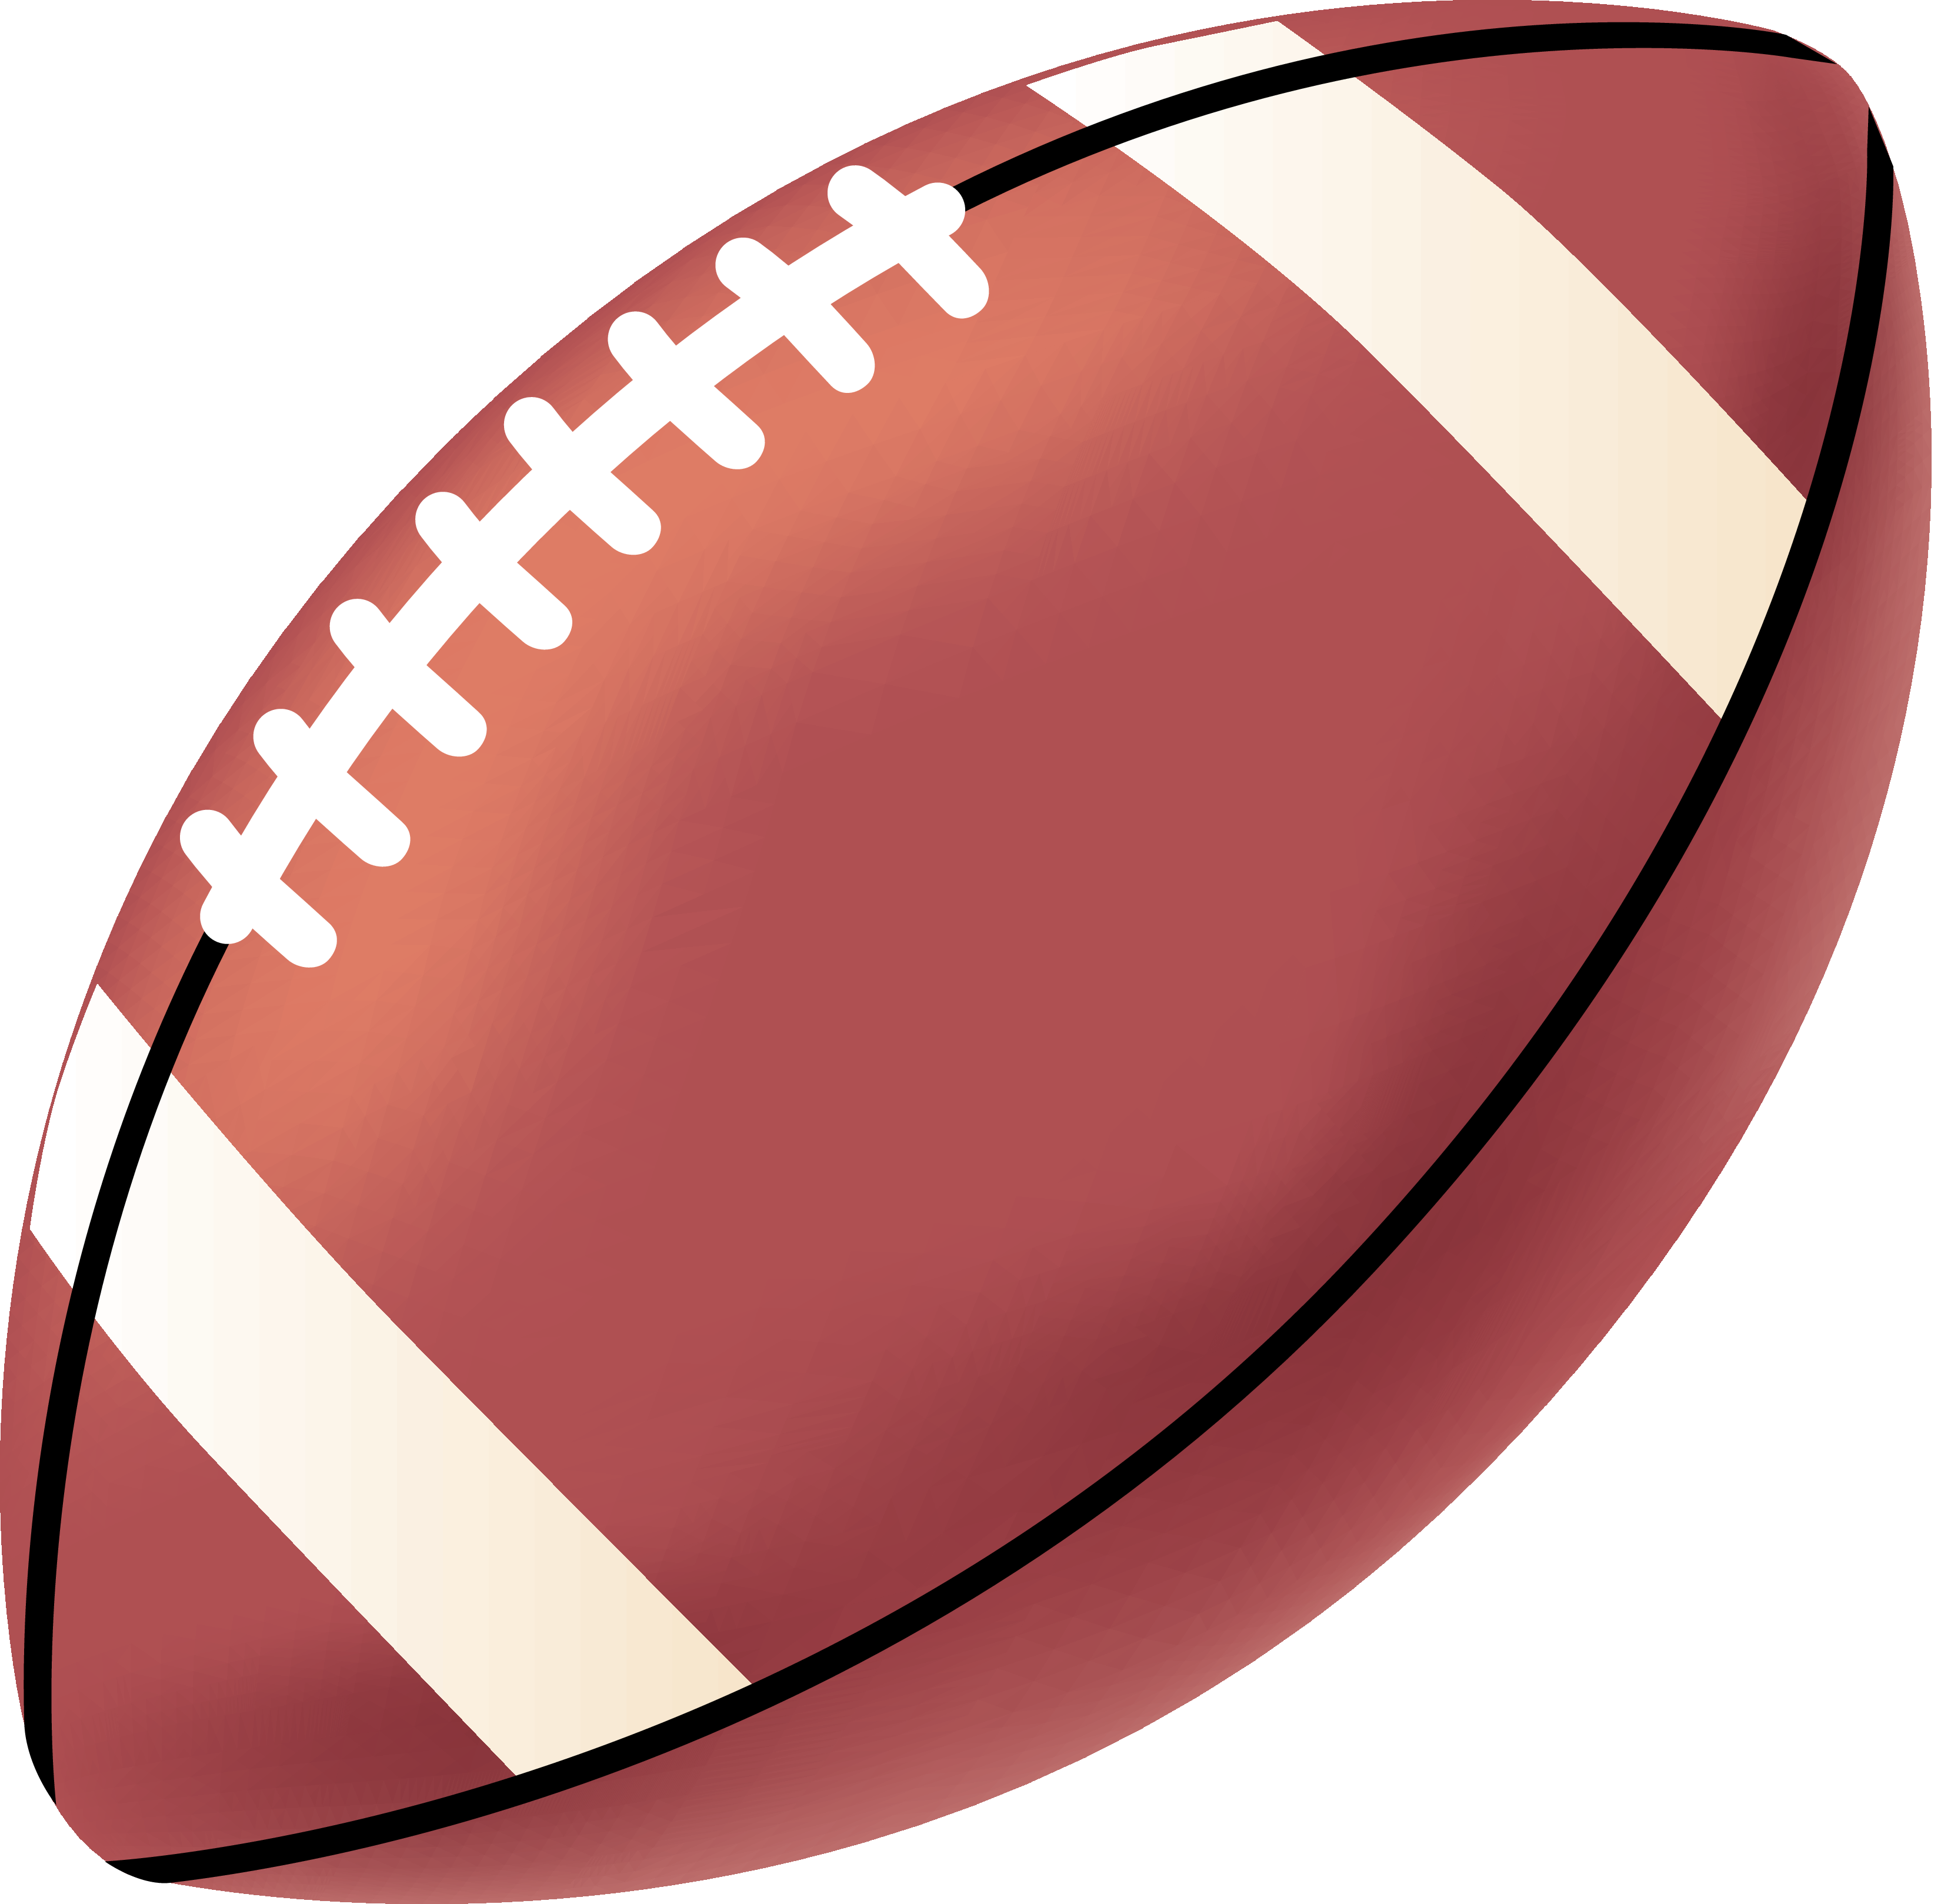 Clip Art Black And White Football Clipart.